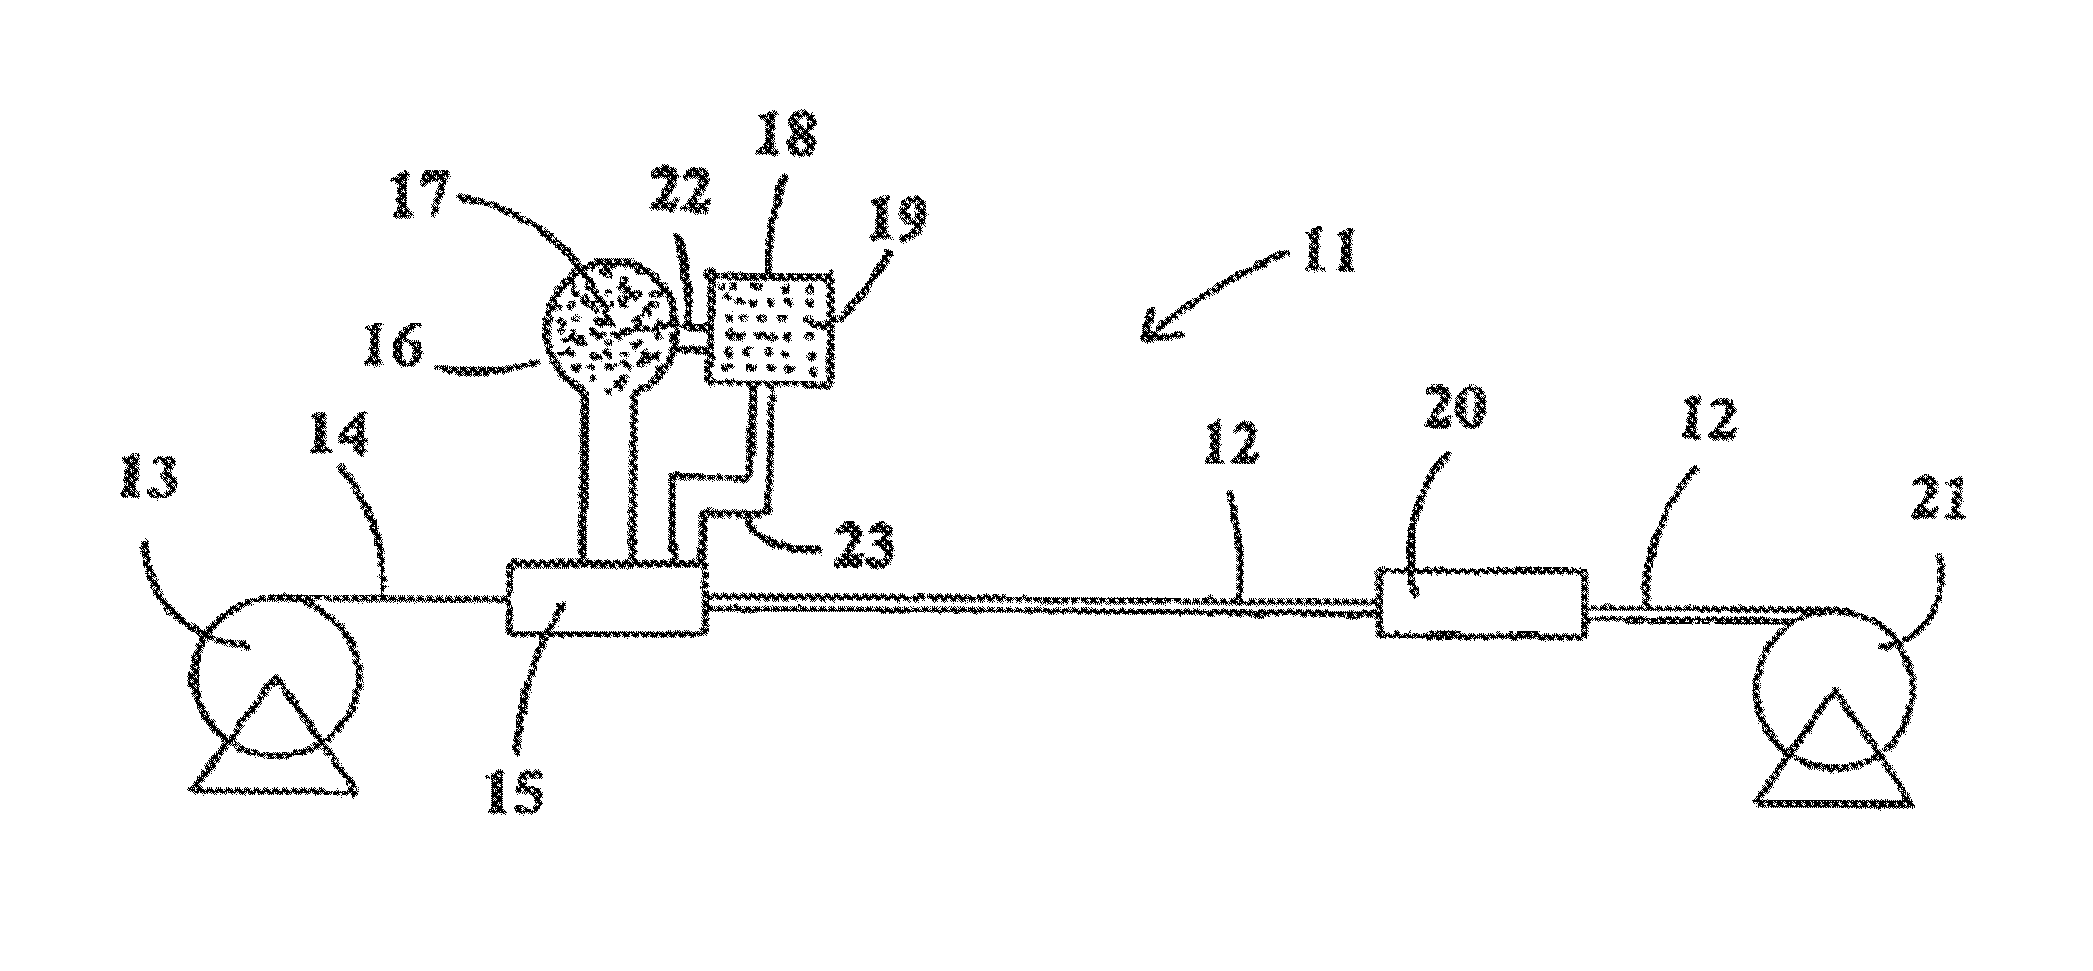 Method of manufacturing electrical cable, and resulting product, with reduced required installation pulling force